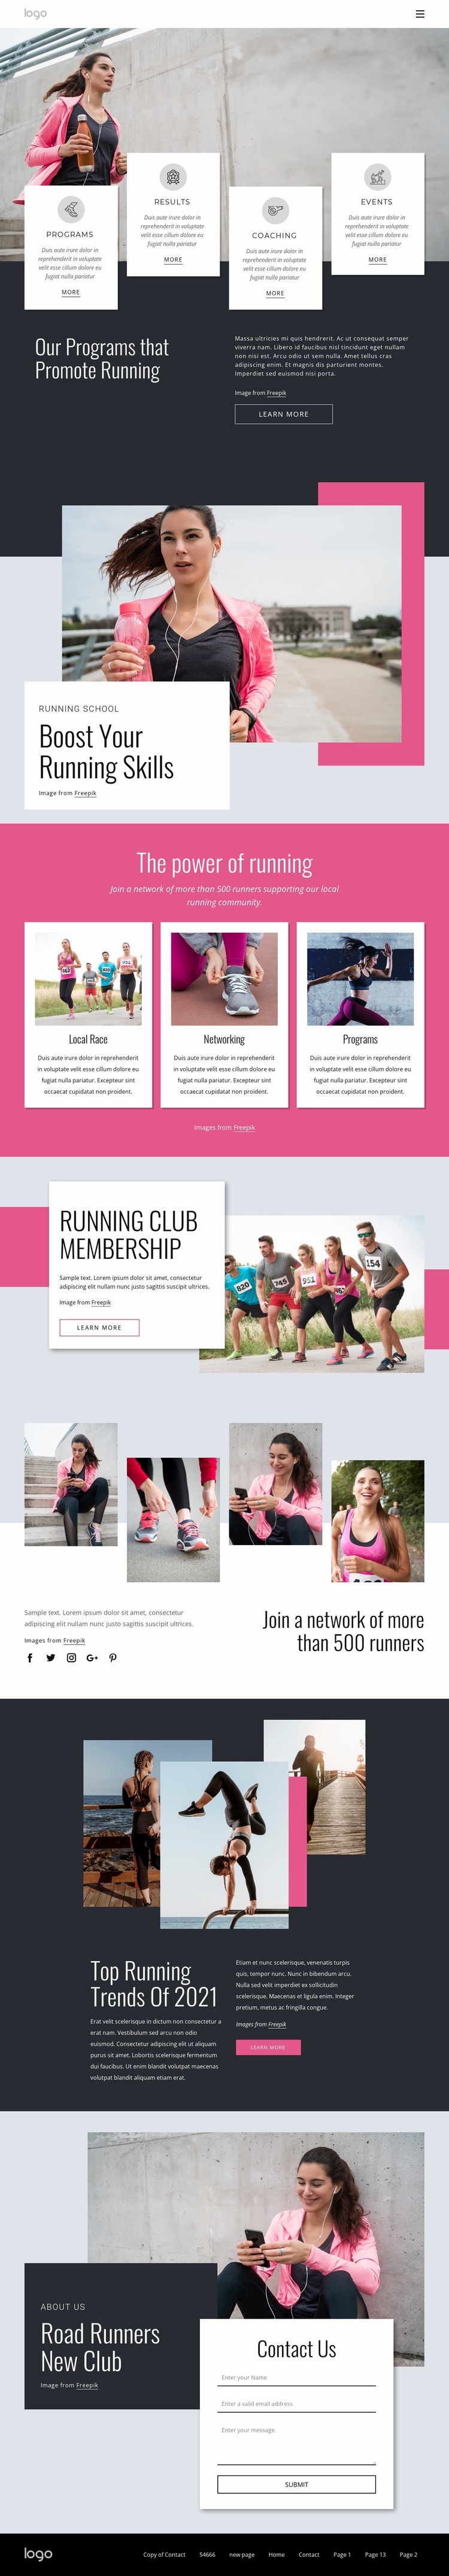 Running and walking community Wix Template Alternative